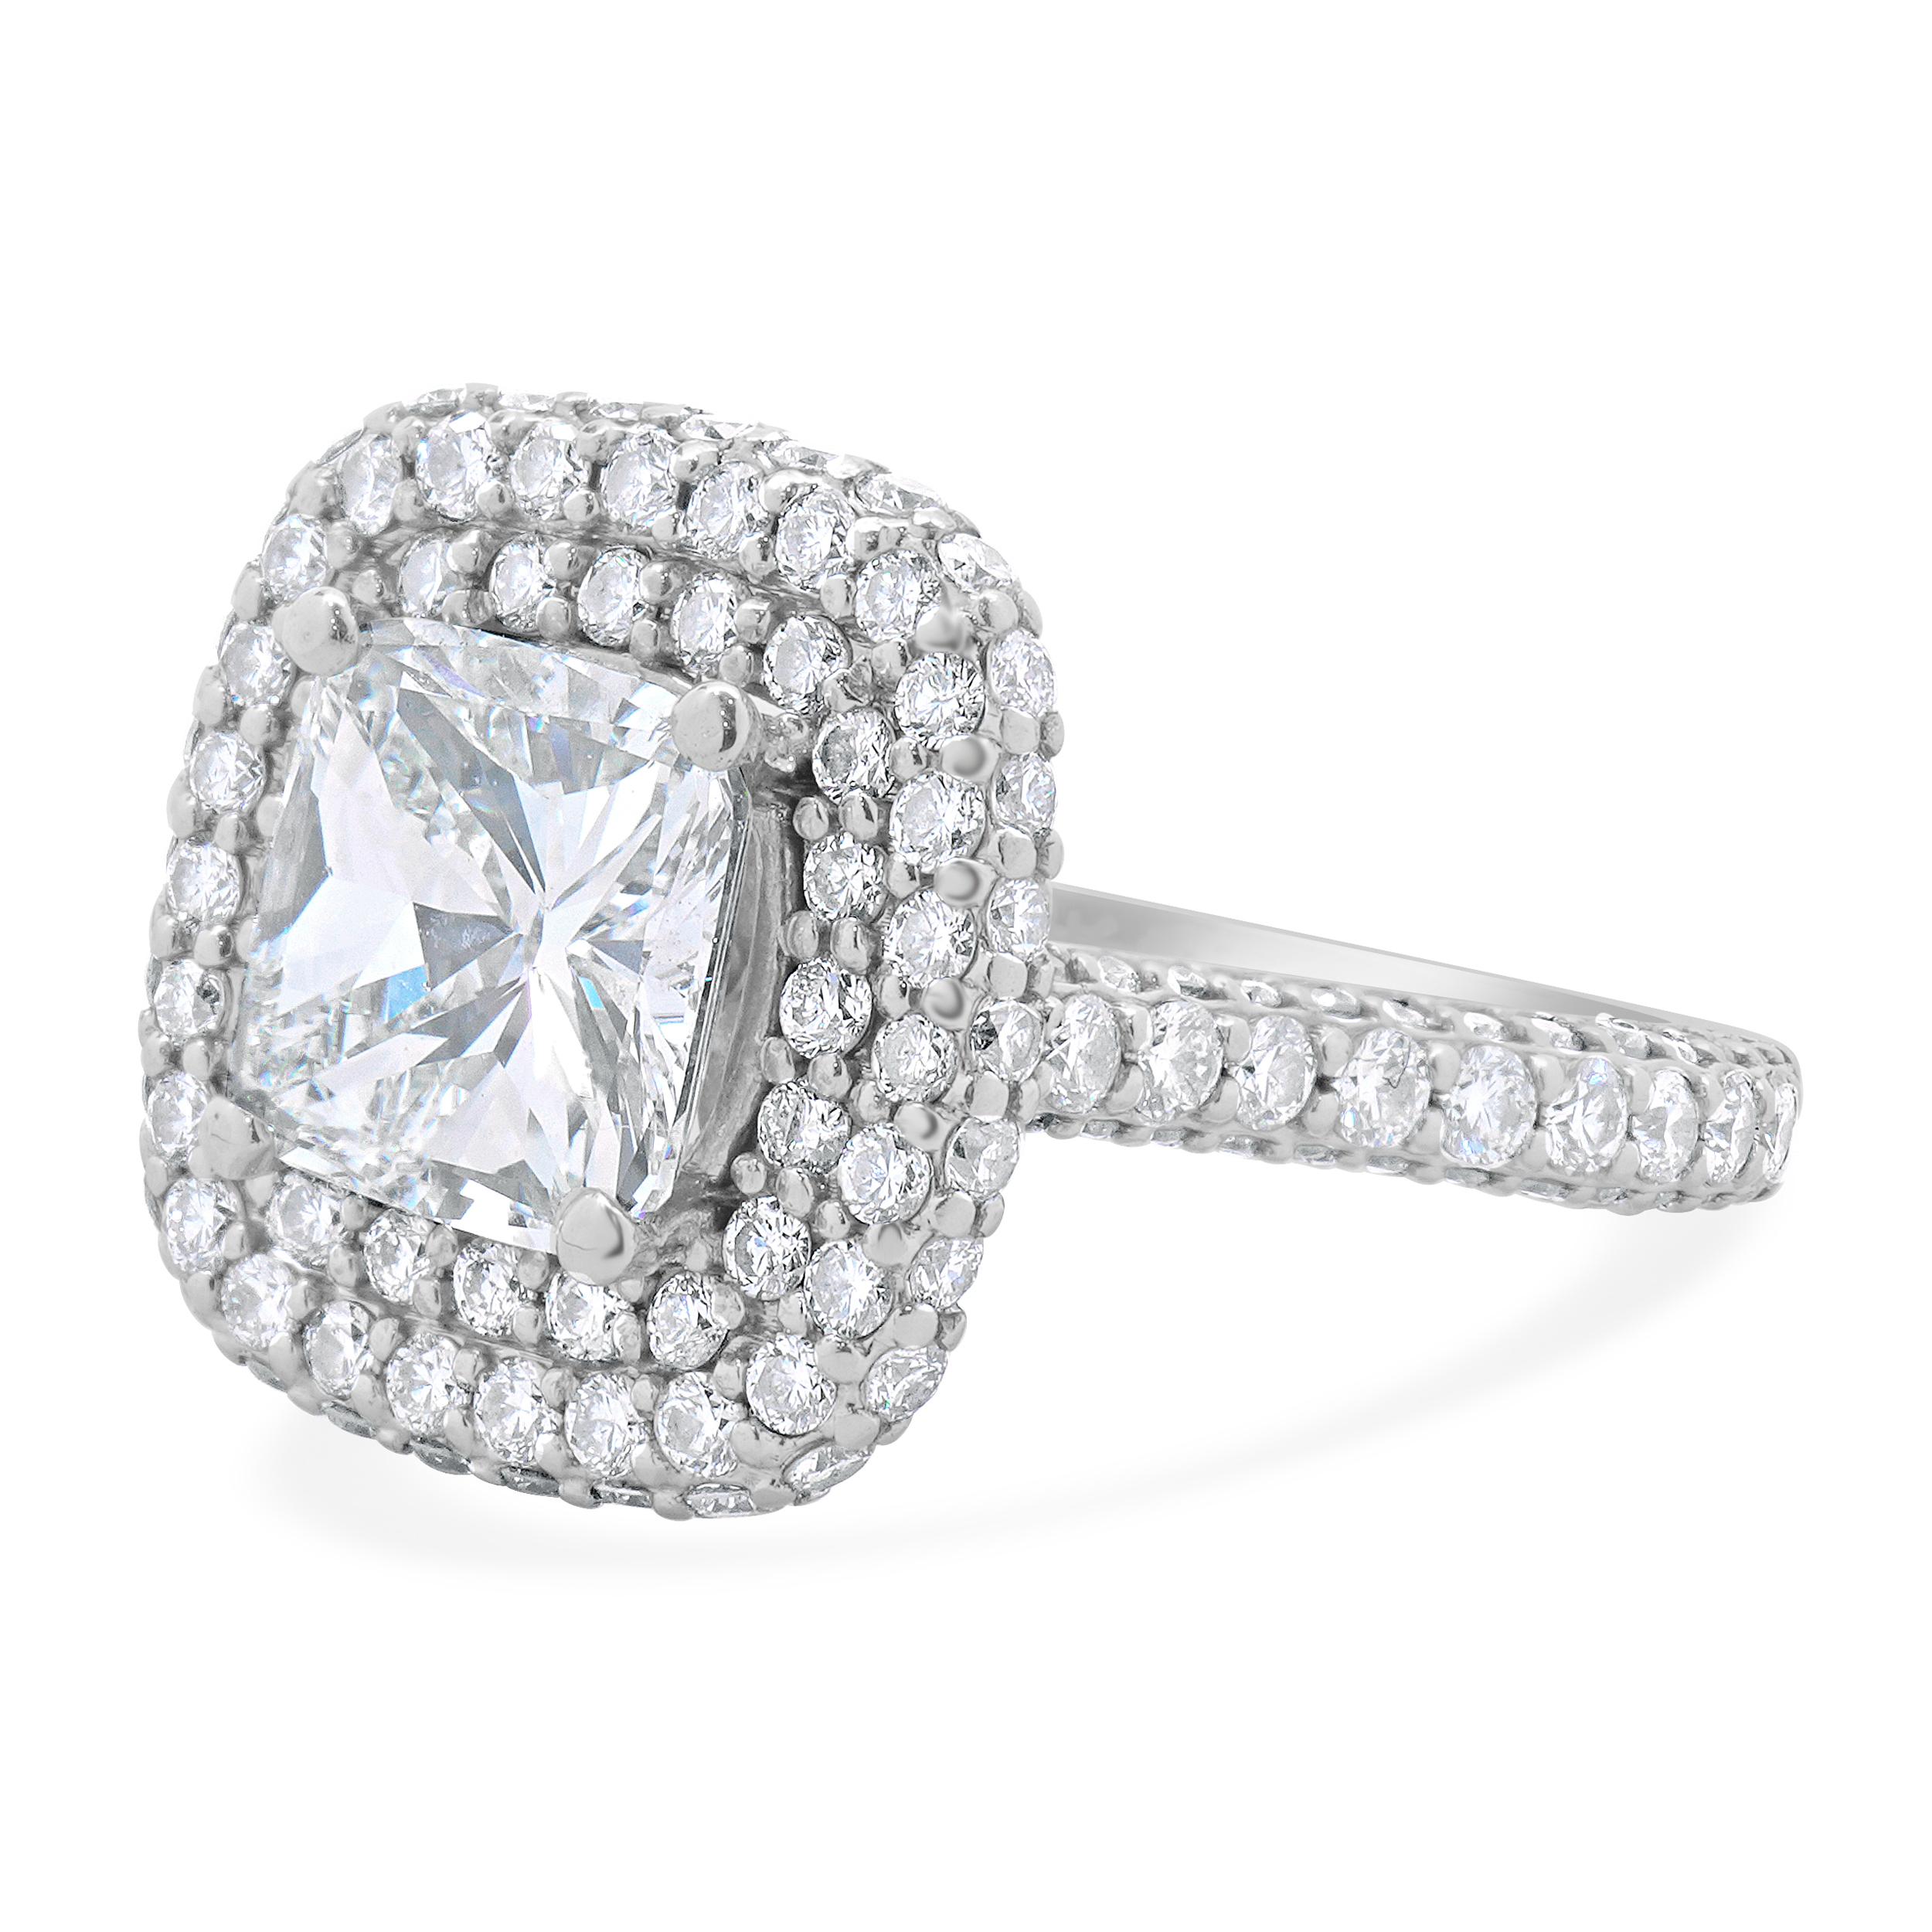 Designer: custom
Material: 14K white gold
Diamond: 1 cushion cut = 2.00ct
Color: I
Clarity: VS1
GIA: 7173475235
Diamond: 98 round brilliant cut = 1.50cttw
Color: H
Clarity: SI1-2
Dimensions: ring top measures 14.1mm wide
Ring Size: 4.75